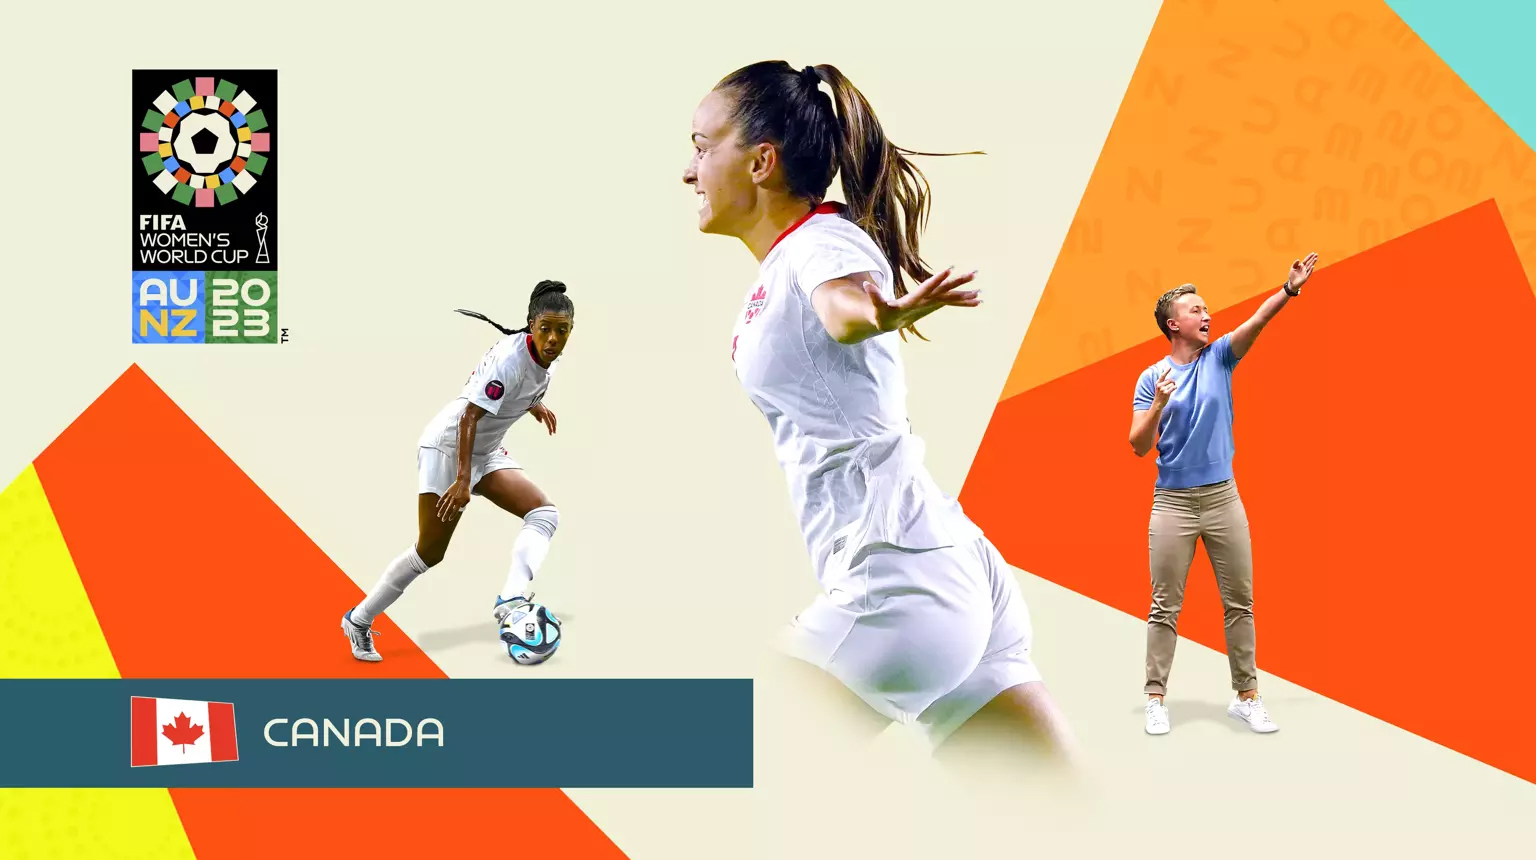 How to watch the 2023 Womens FIFA World Cup in Canada